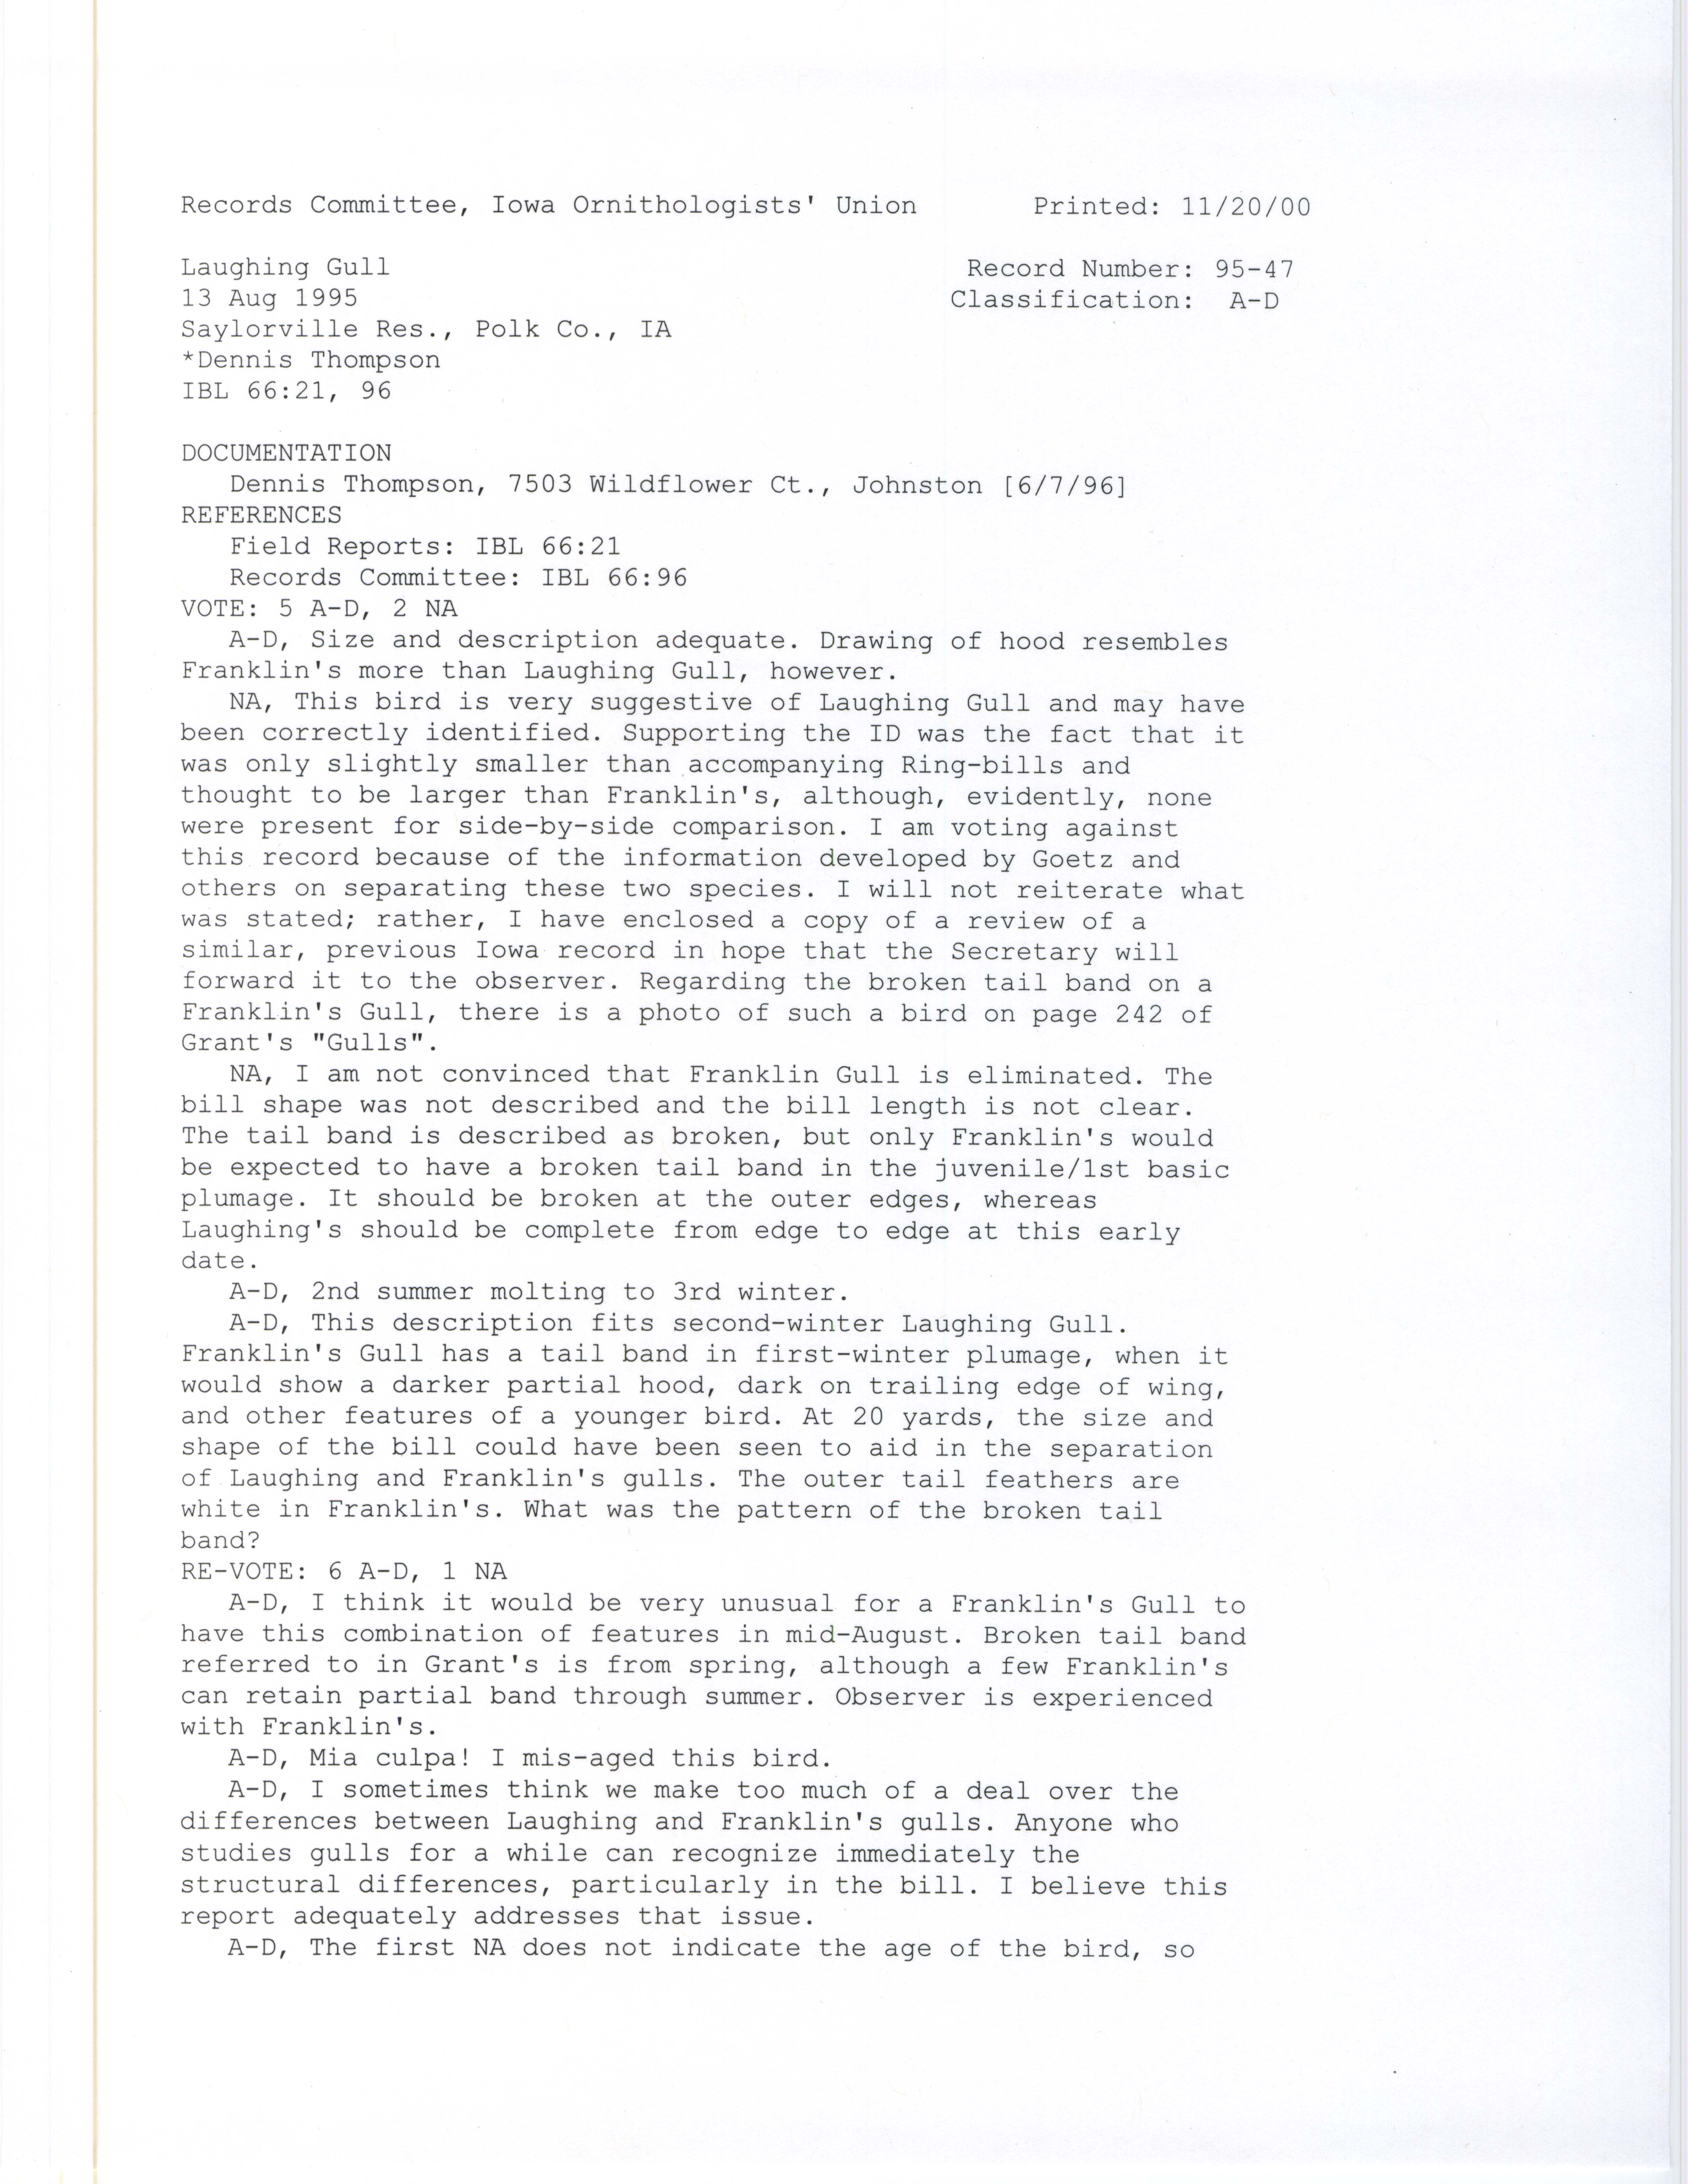 Records Committee review for rare bird sighting of Laughing Gull at Saylorville Reservoir, 1995